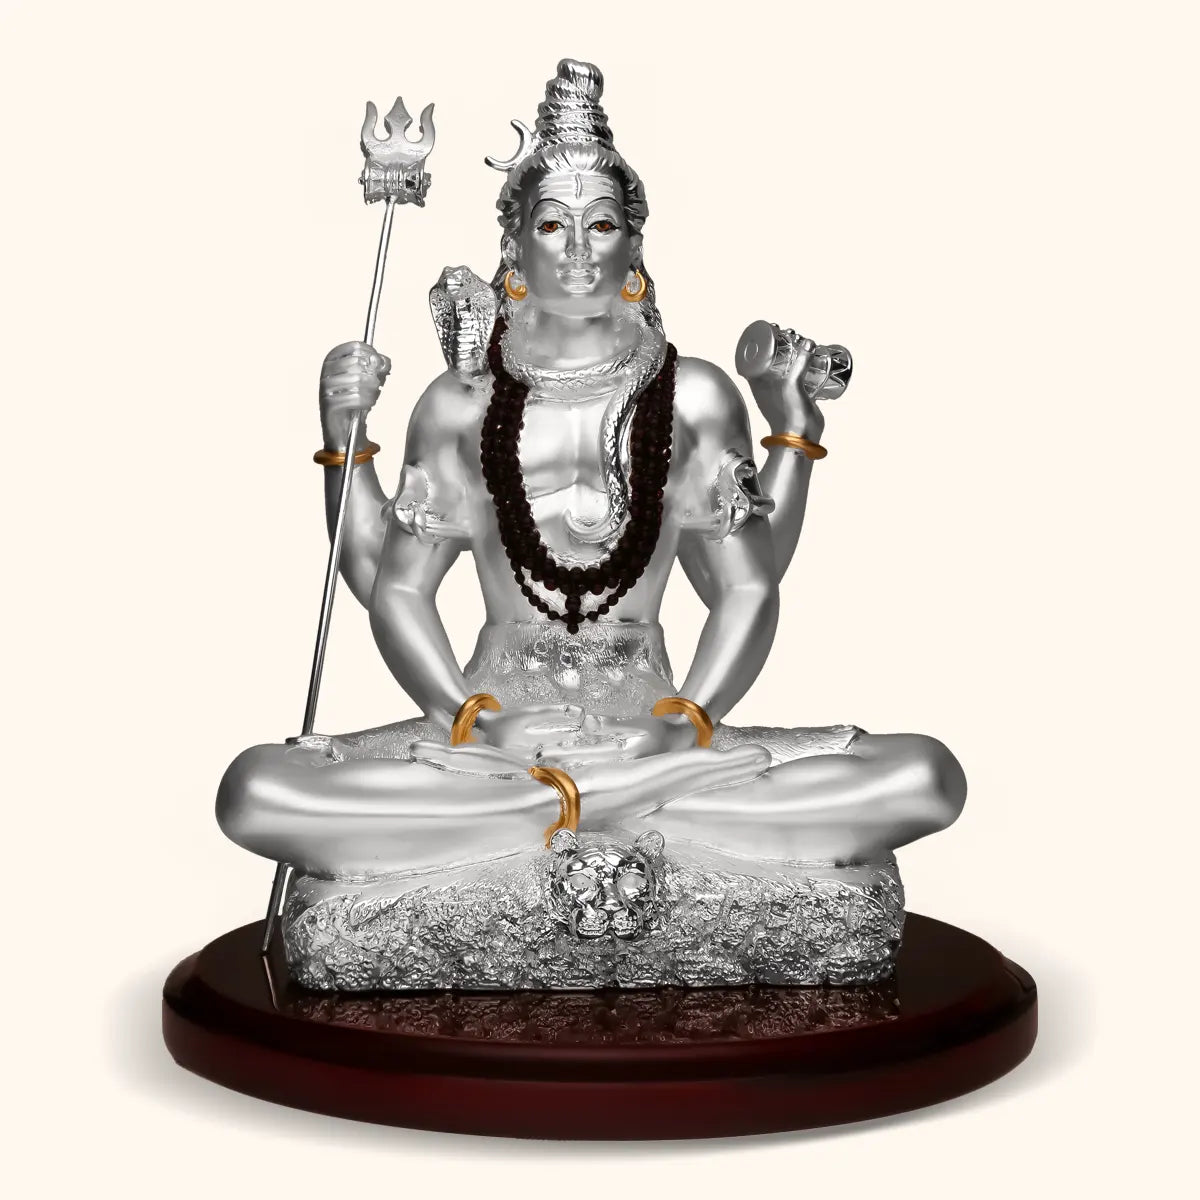 Free images of lord shiva 4k image